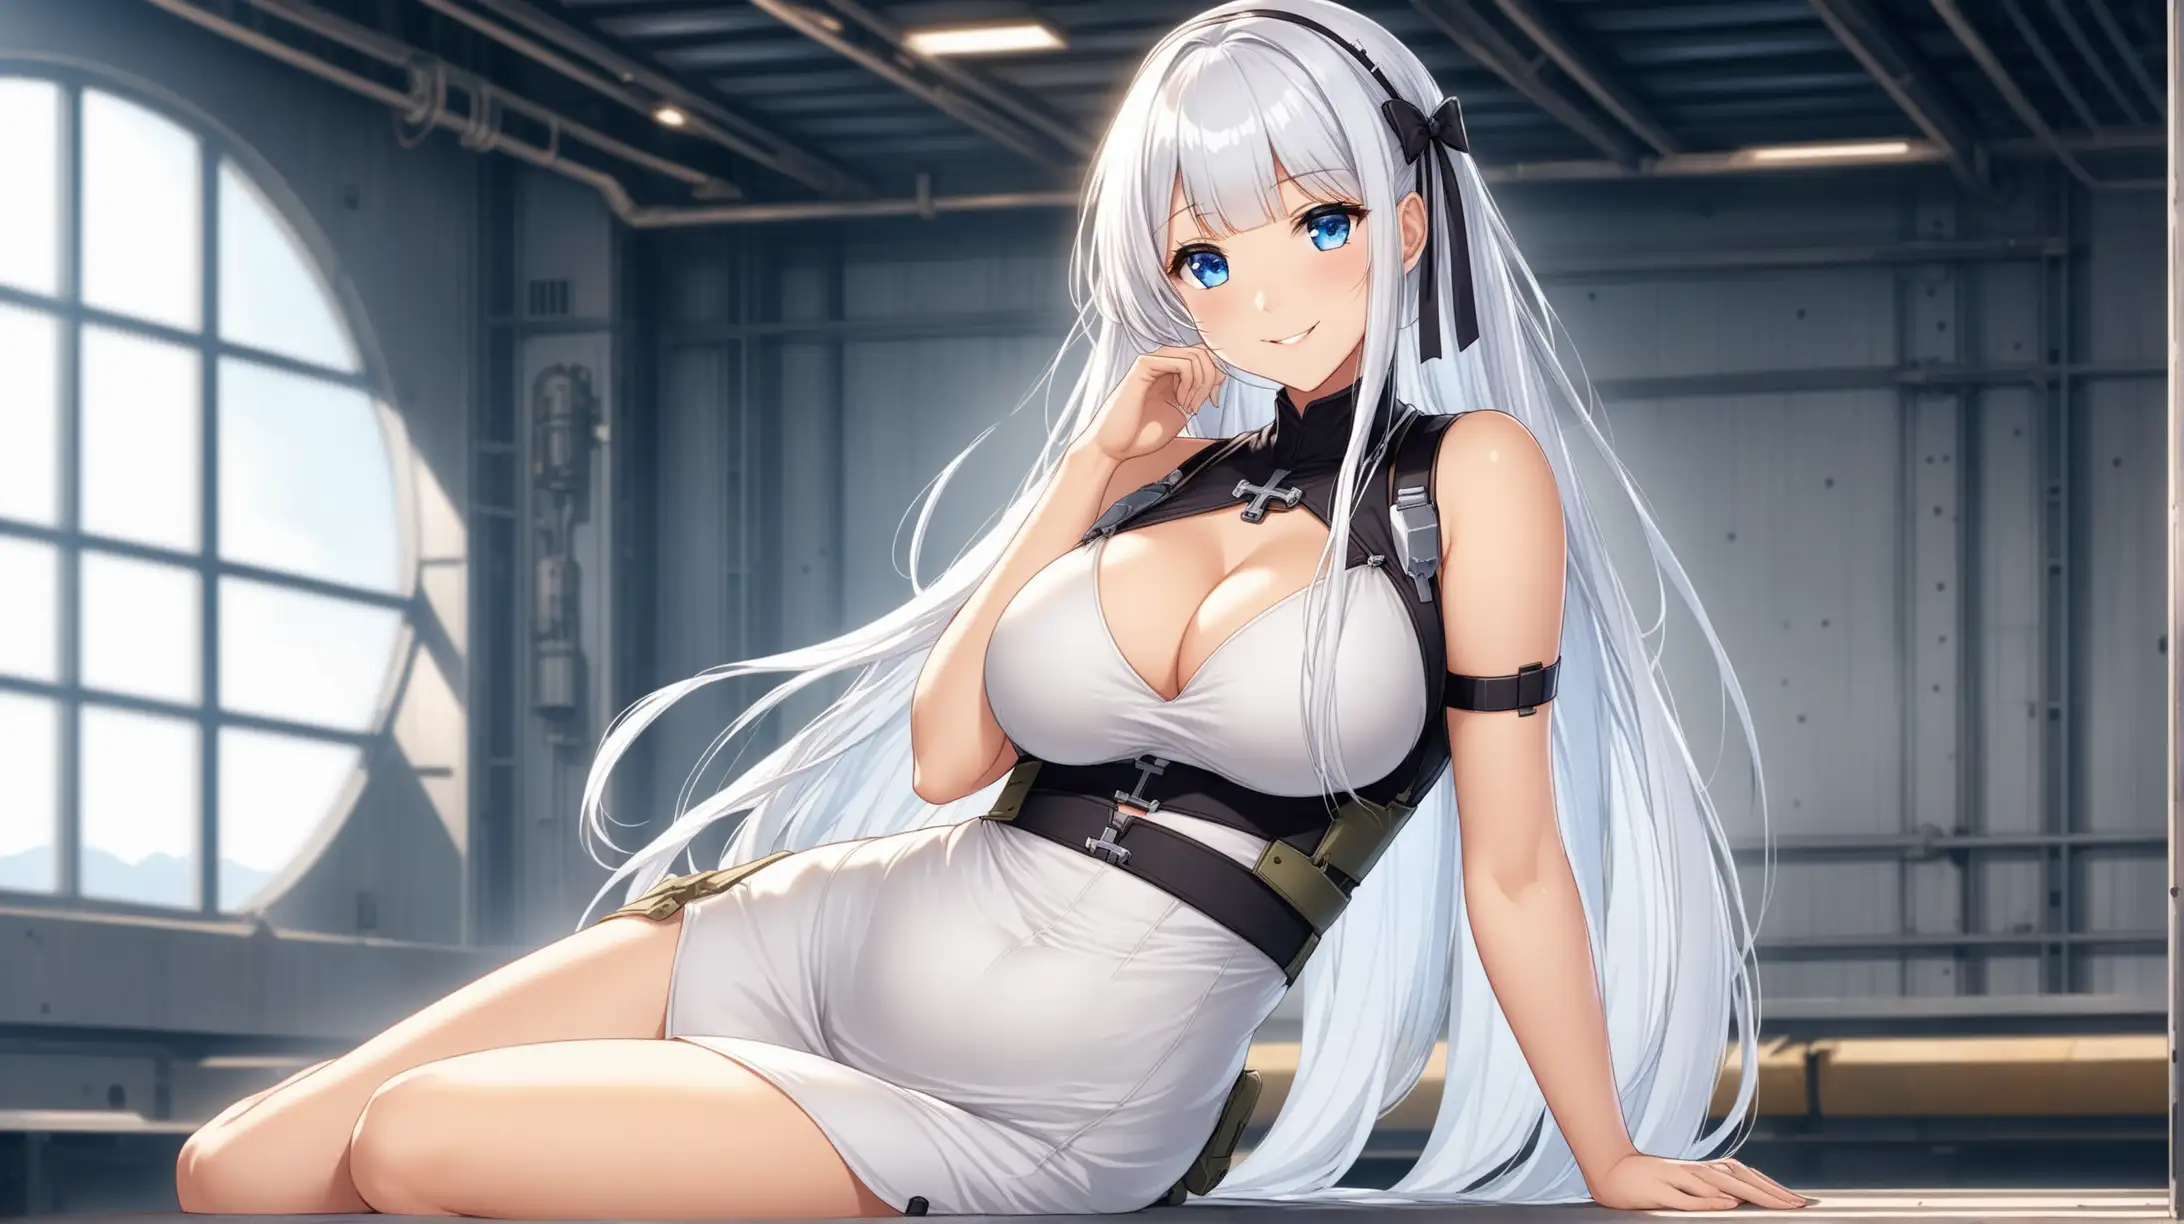 Draw the character Illustrious from Azur Lane, long hair, blue eyes, high quality, indoors, natural lighting, in a relaxed pose, wearing an outfit inspired from the Fallout series, smiling at the viewer